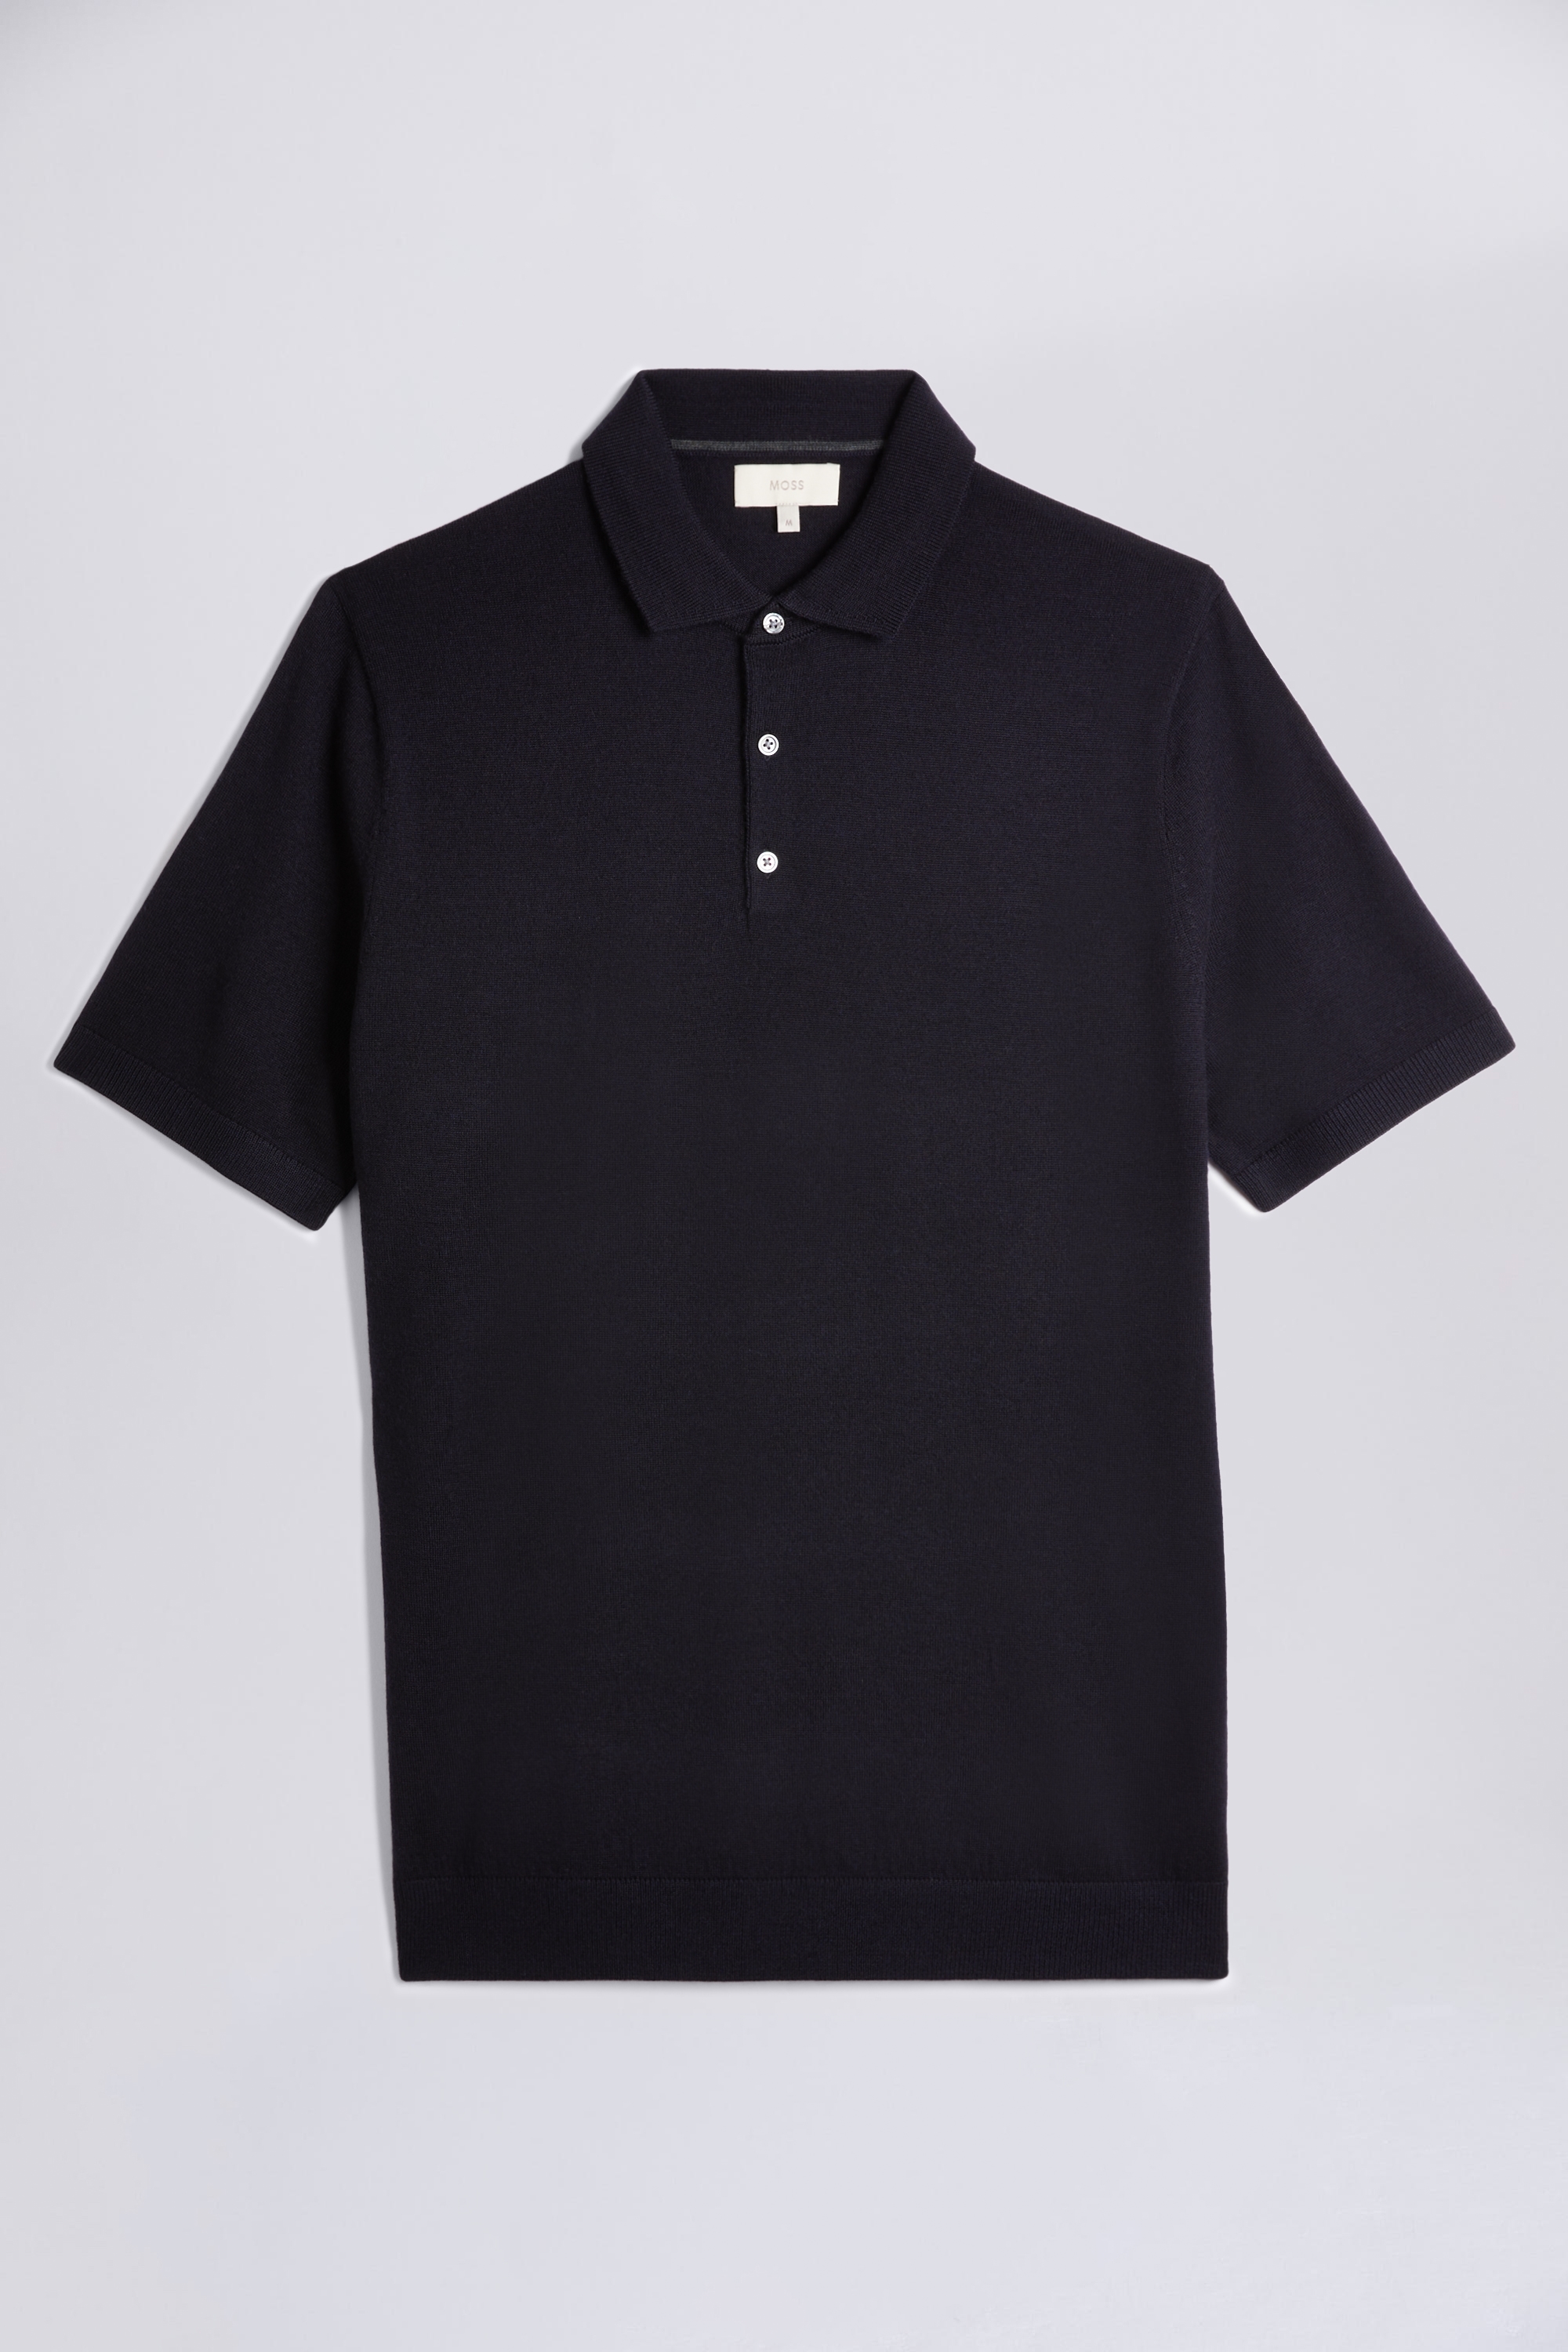 Navy Merino 3 Button Polo Shirt | Buy Online at Moss